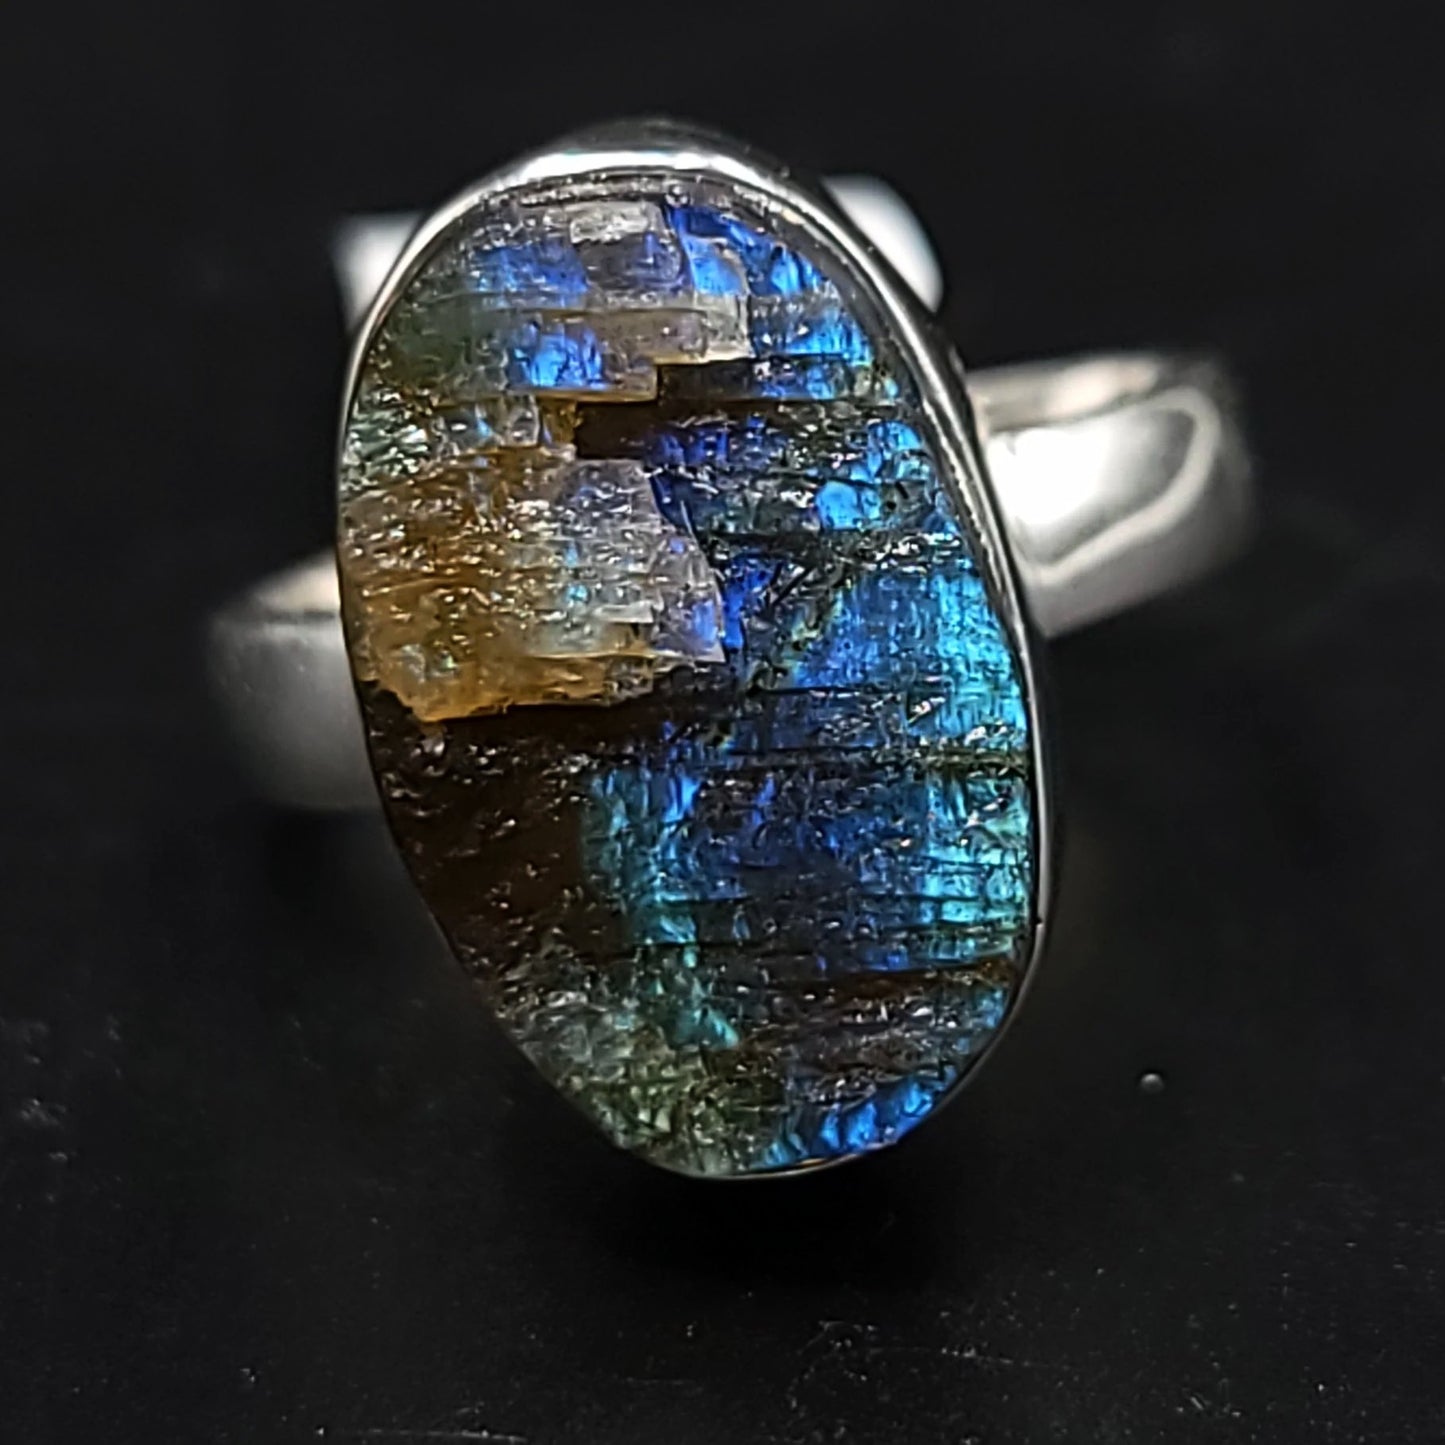 Labradorite Ring Sterling Silver Oval Rough Blue/Green Stone - Elevated Metaphysical